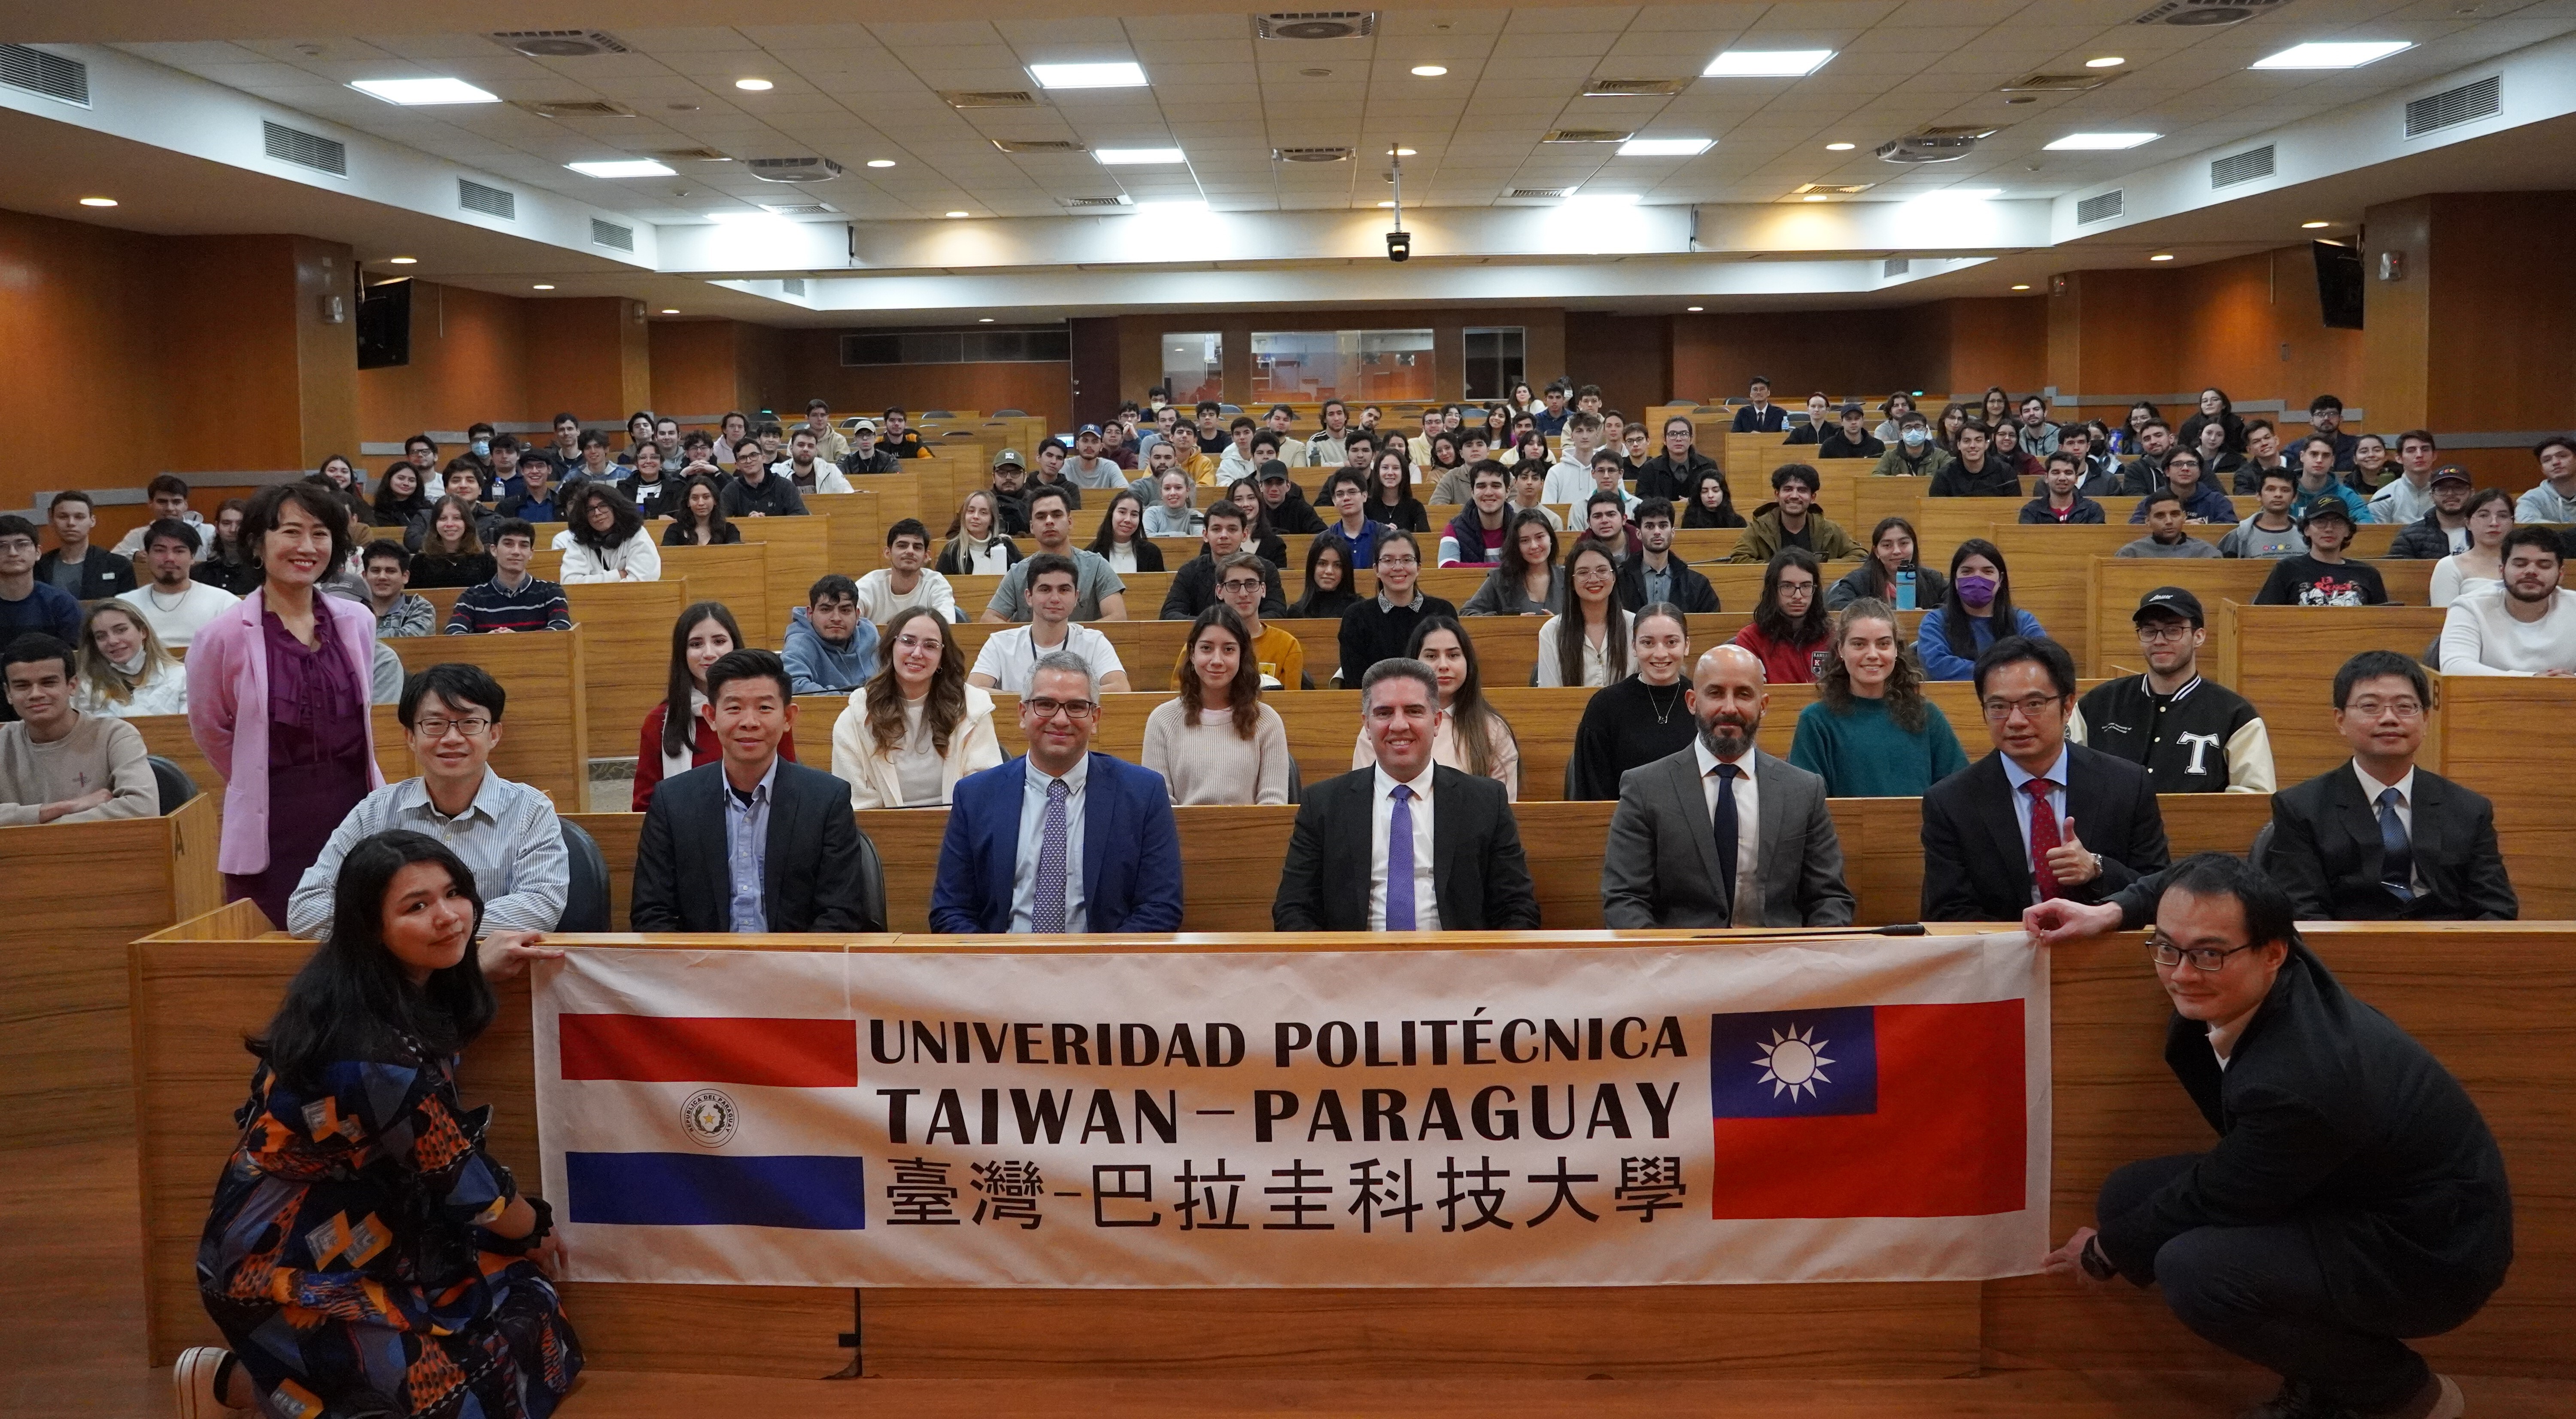 The delegation of Paraguay’s Minister of Information and Communication Technologies took a group photo with Paraguayan students.